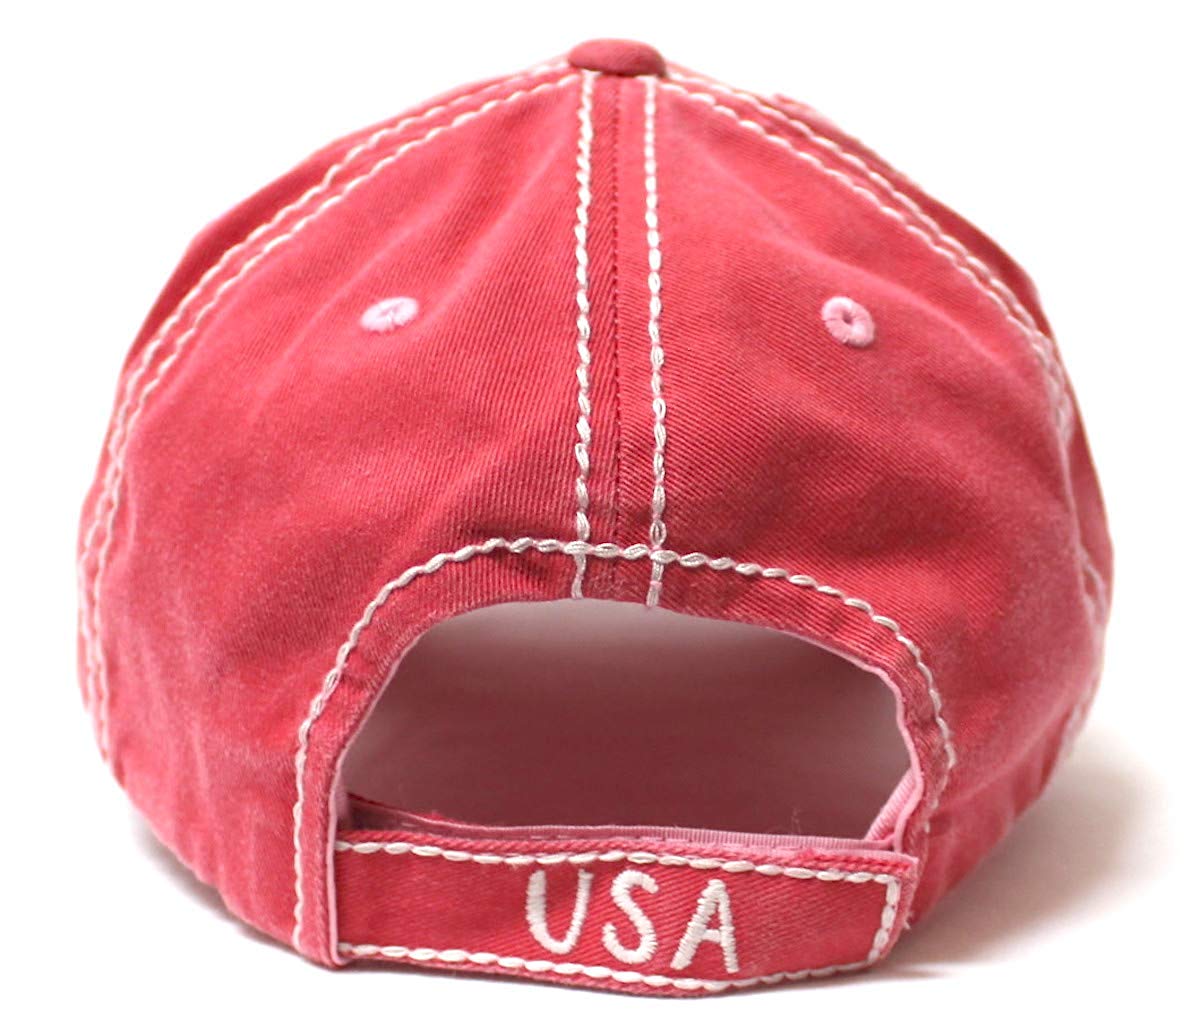 CAPS 'N VINTAGE USA Flag Patch God Bless America Embroidery Ballcap, Rose Pink - Caps 'N Vintage 